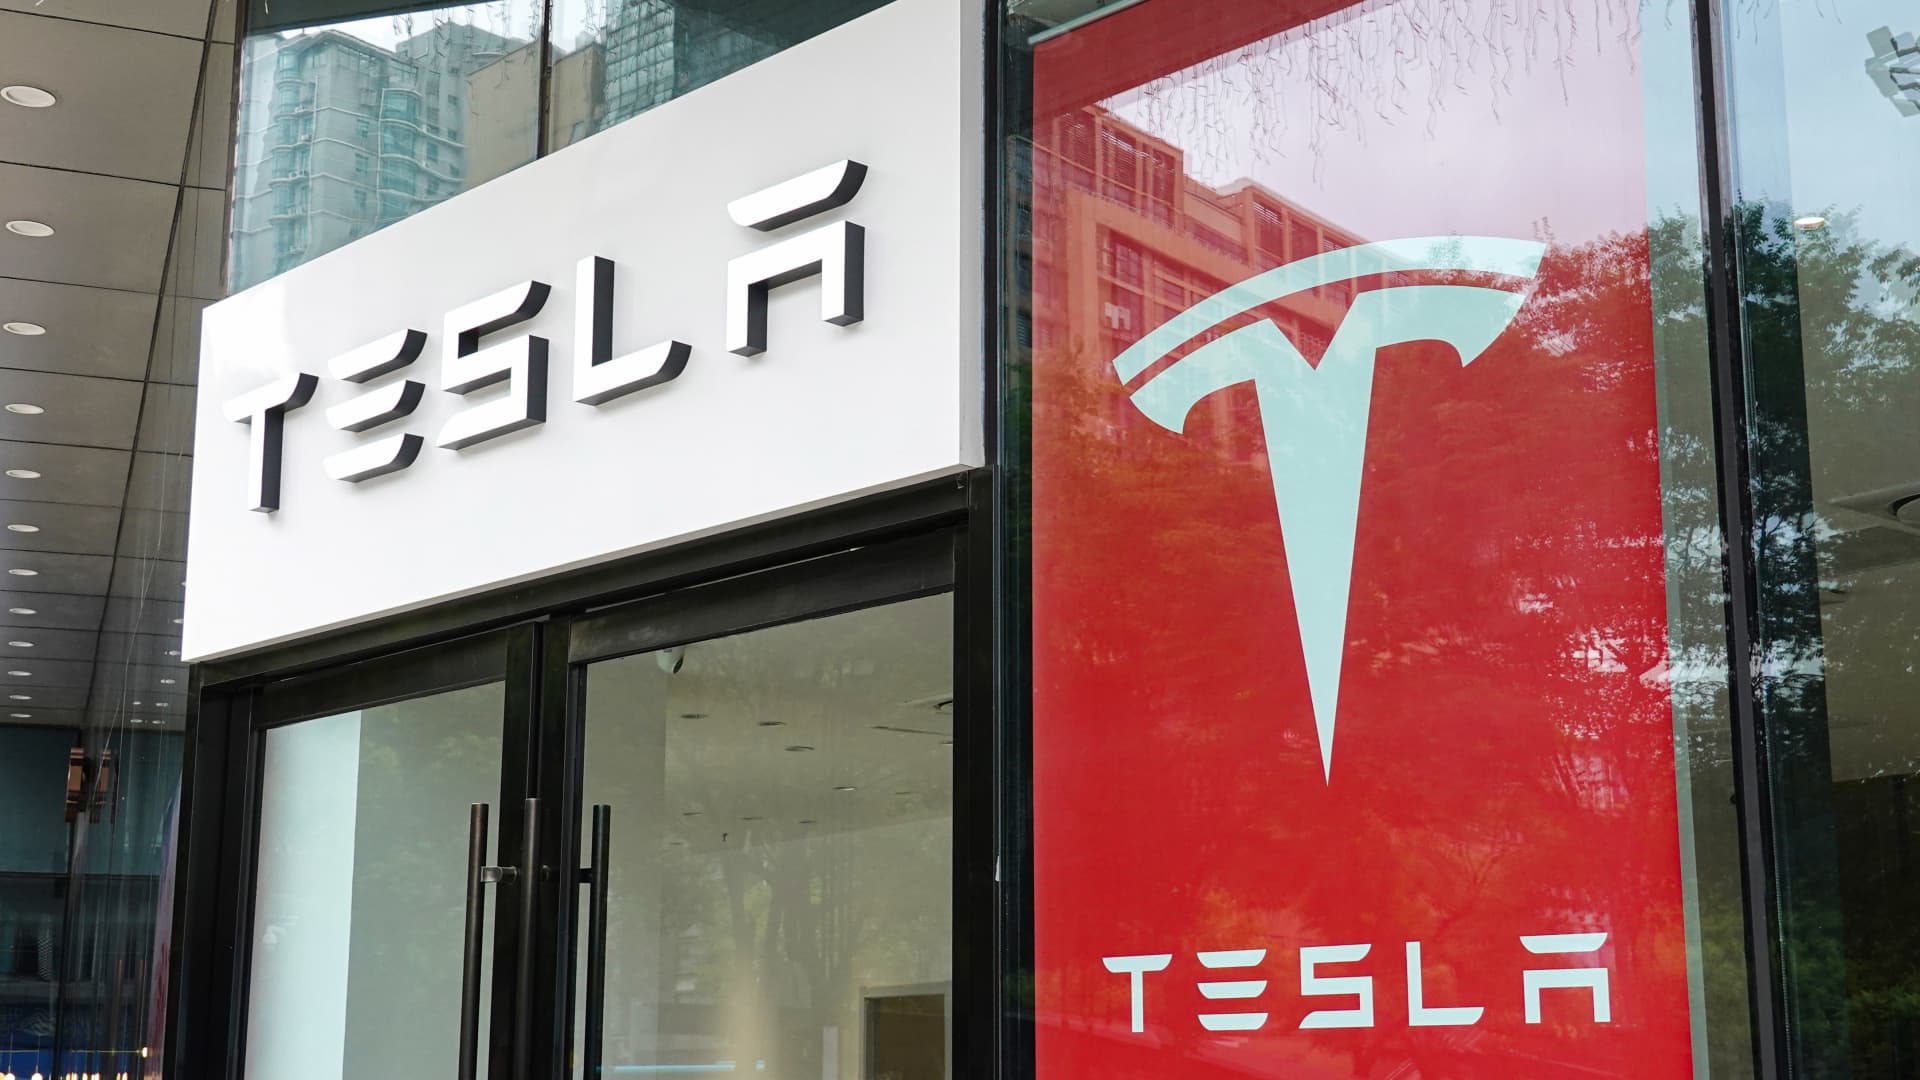 Tesla will ‘keep blowing our minds’ despite Elon Musk’s distractions, shareholder Tencent says